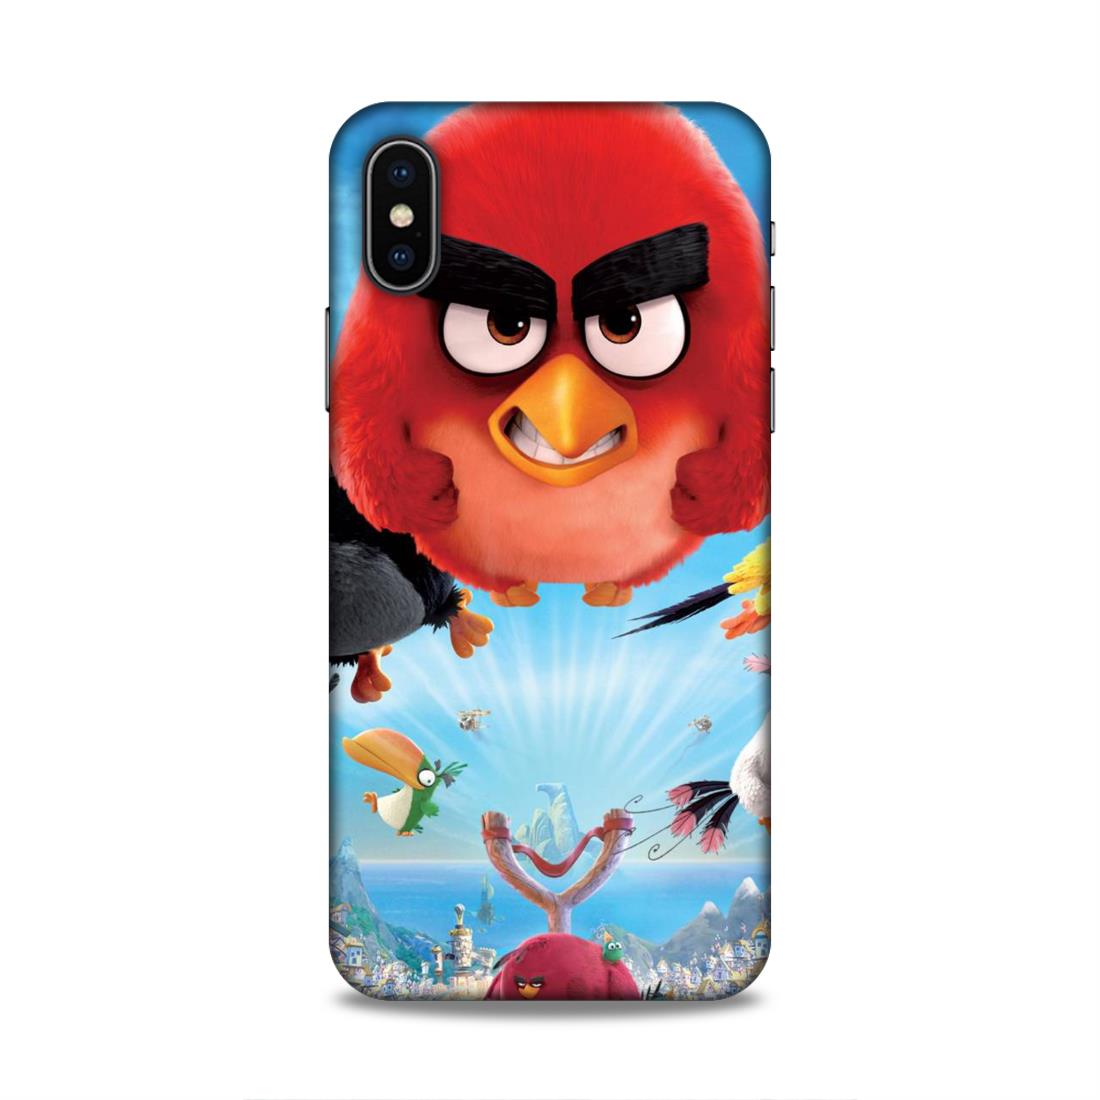 Flying Angry Bird Hard Back Case For Apple iPhone X/XS